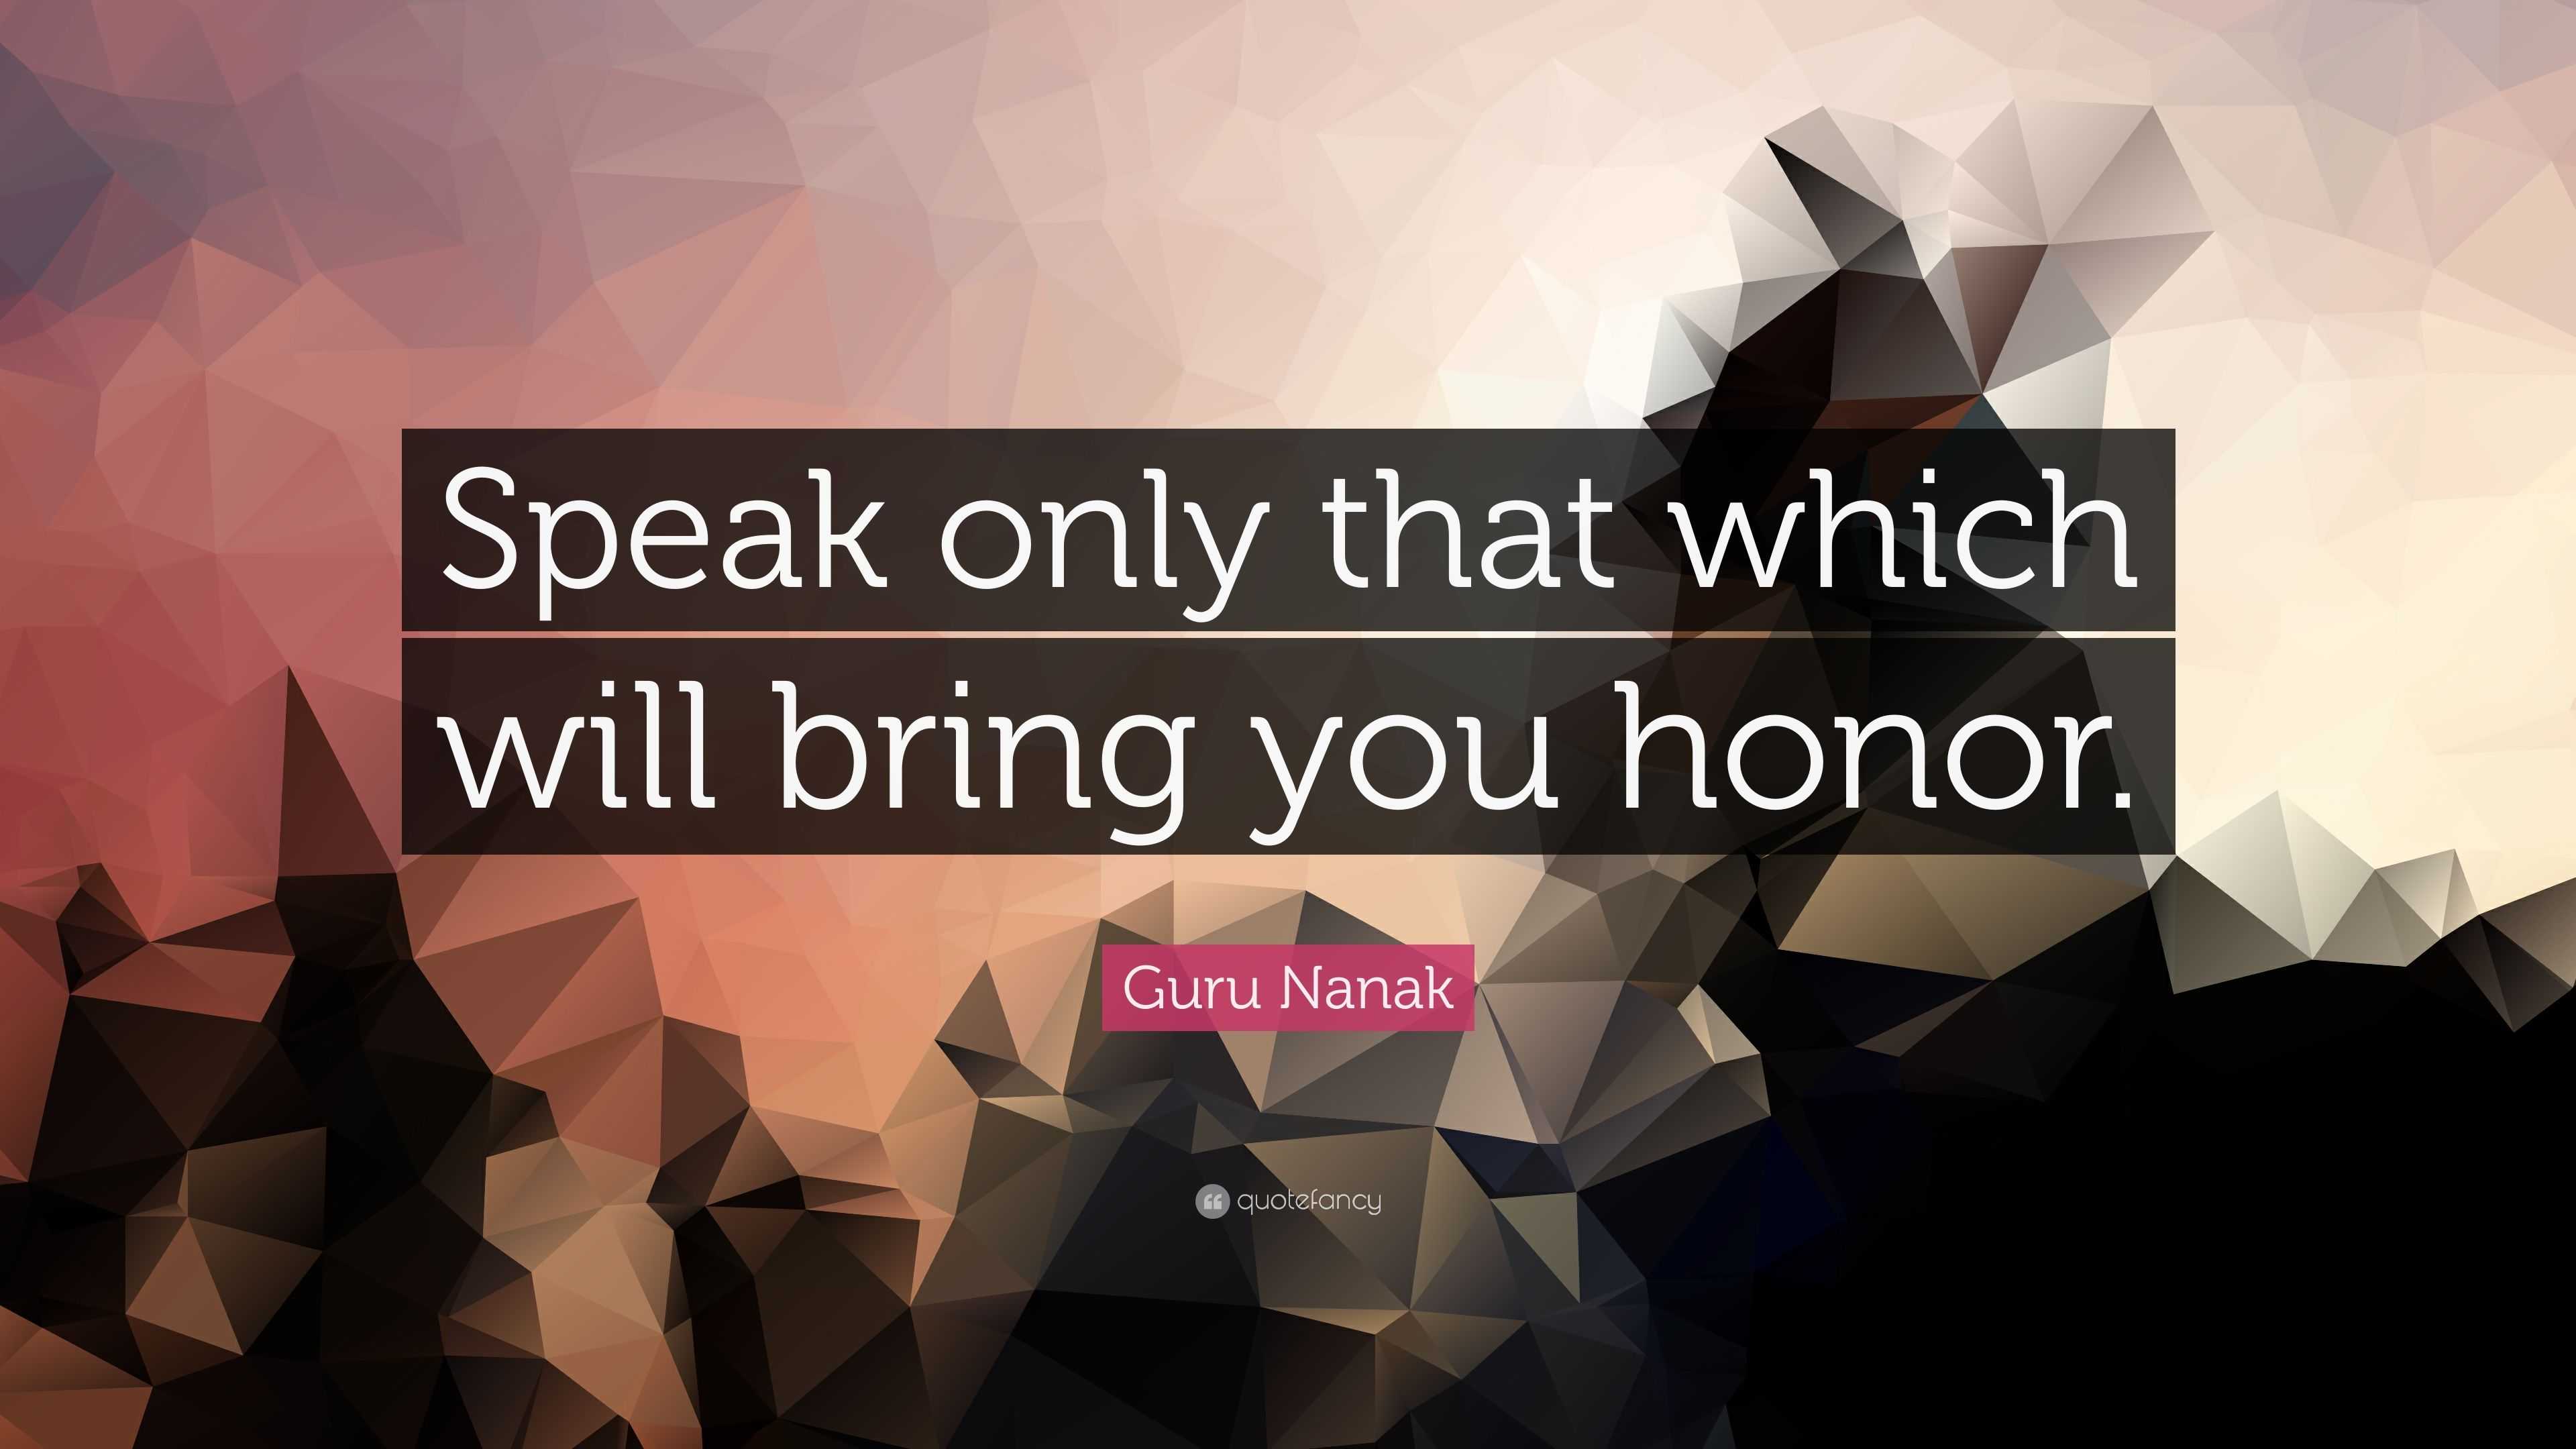 Guru Nanak Quote: “Speak only that which will bring you honor.”